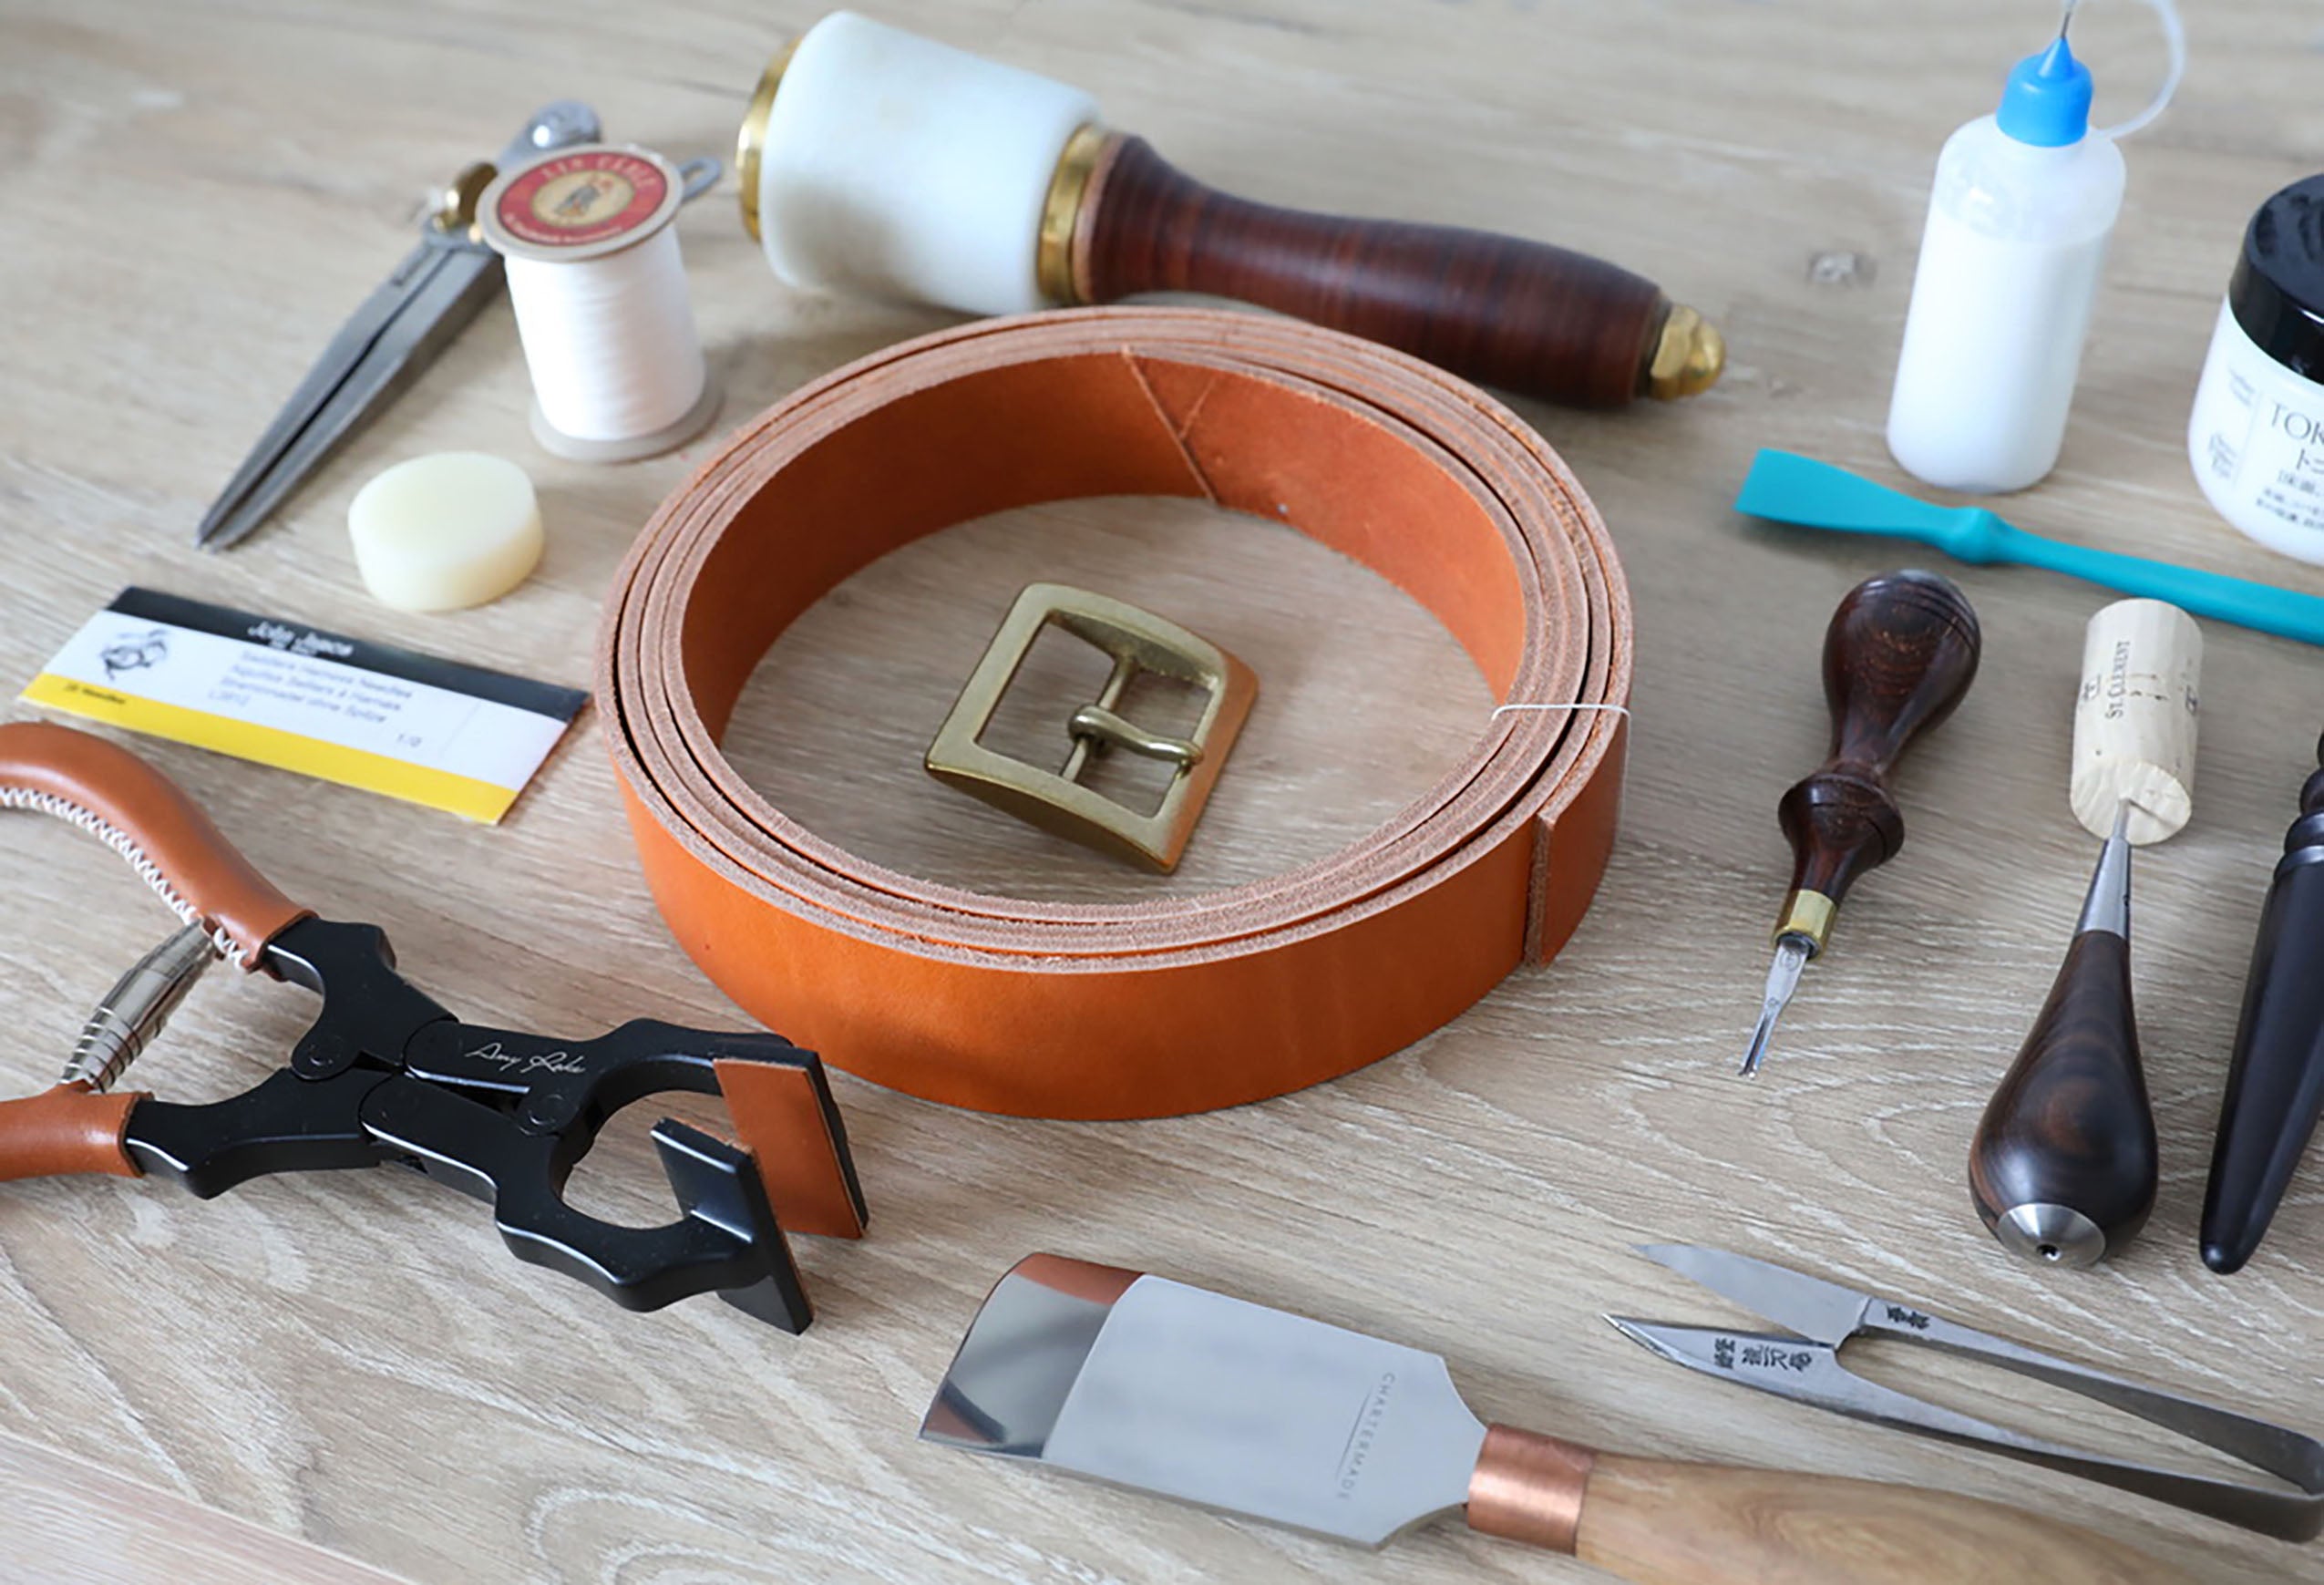 How to Paint Leather: Tools, Tips, and Projects